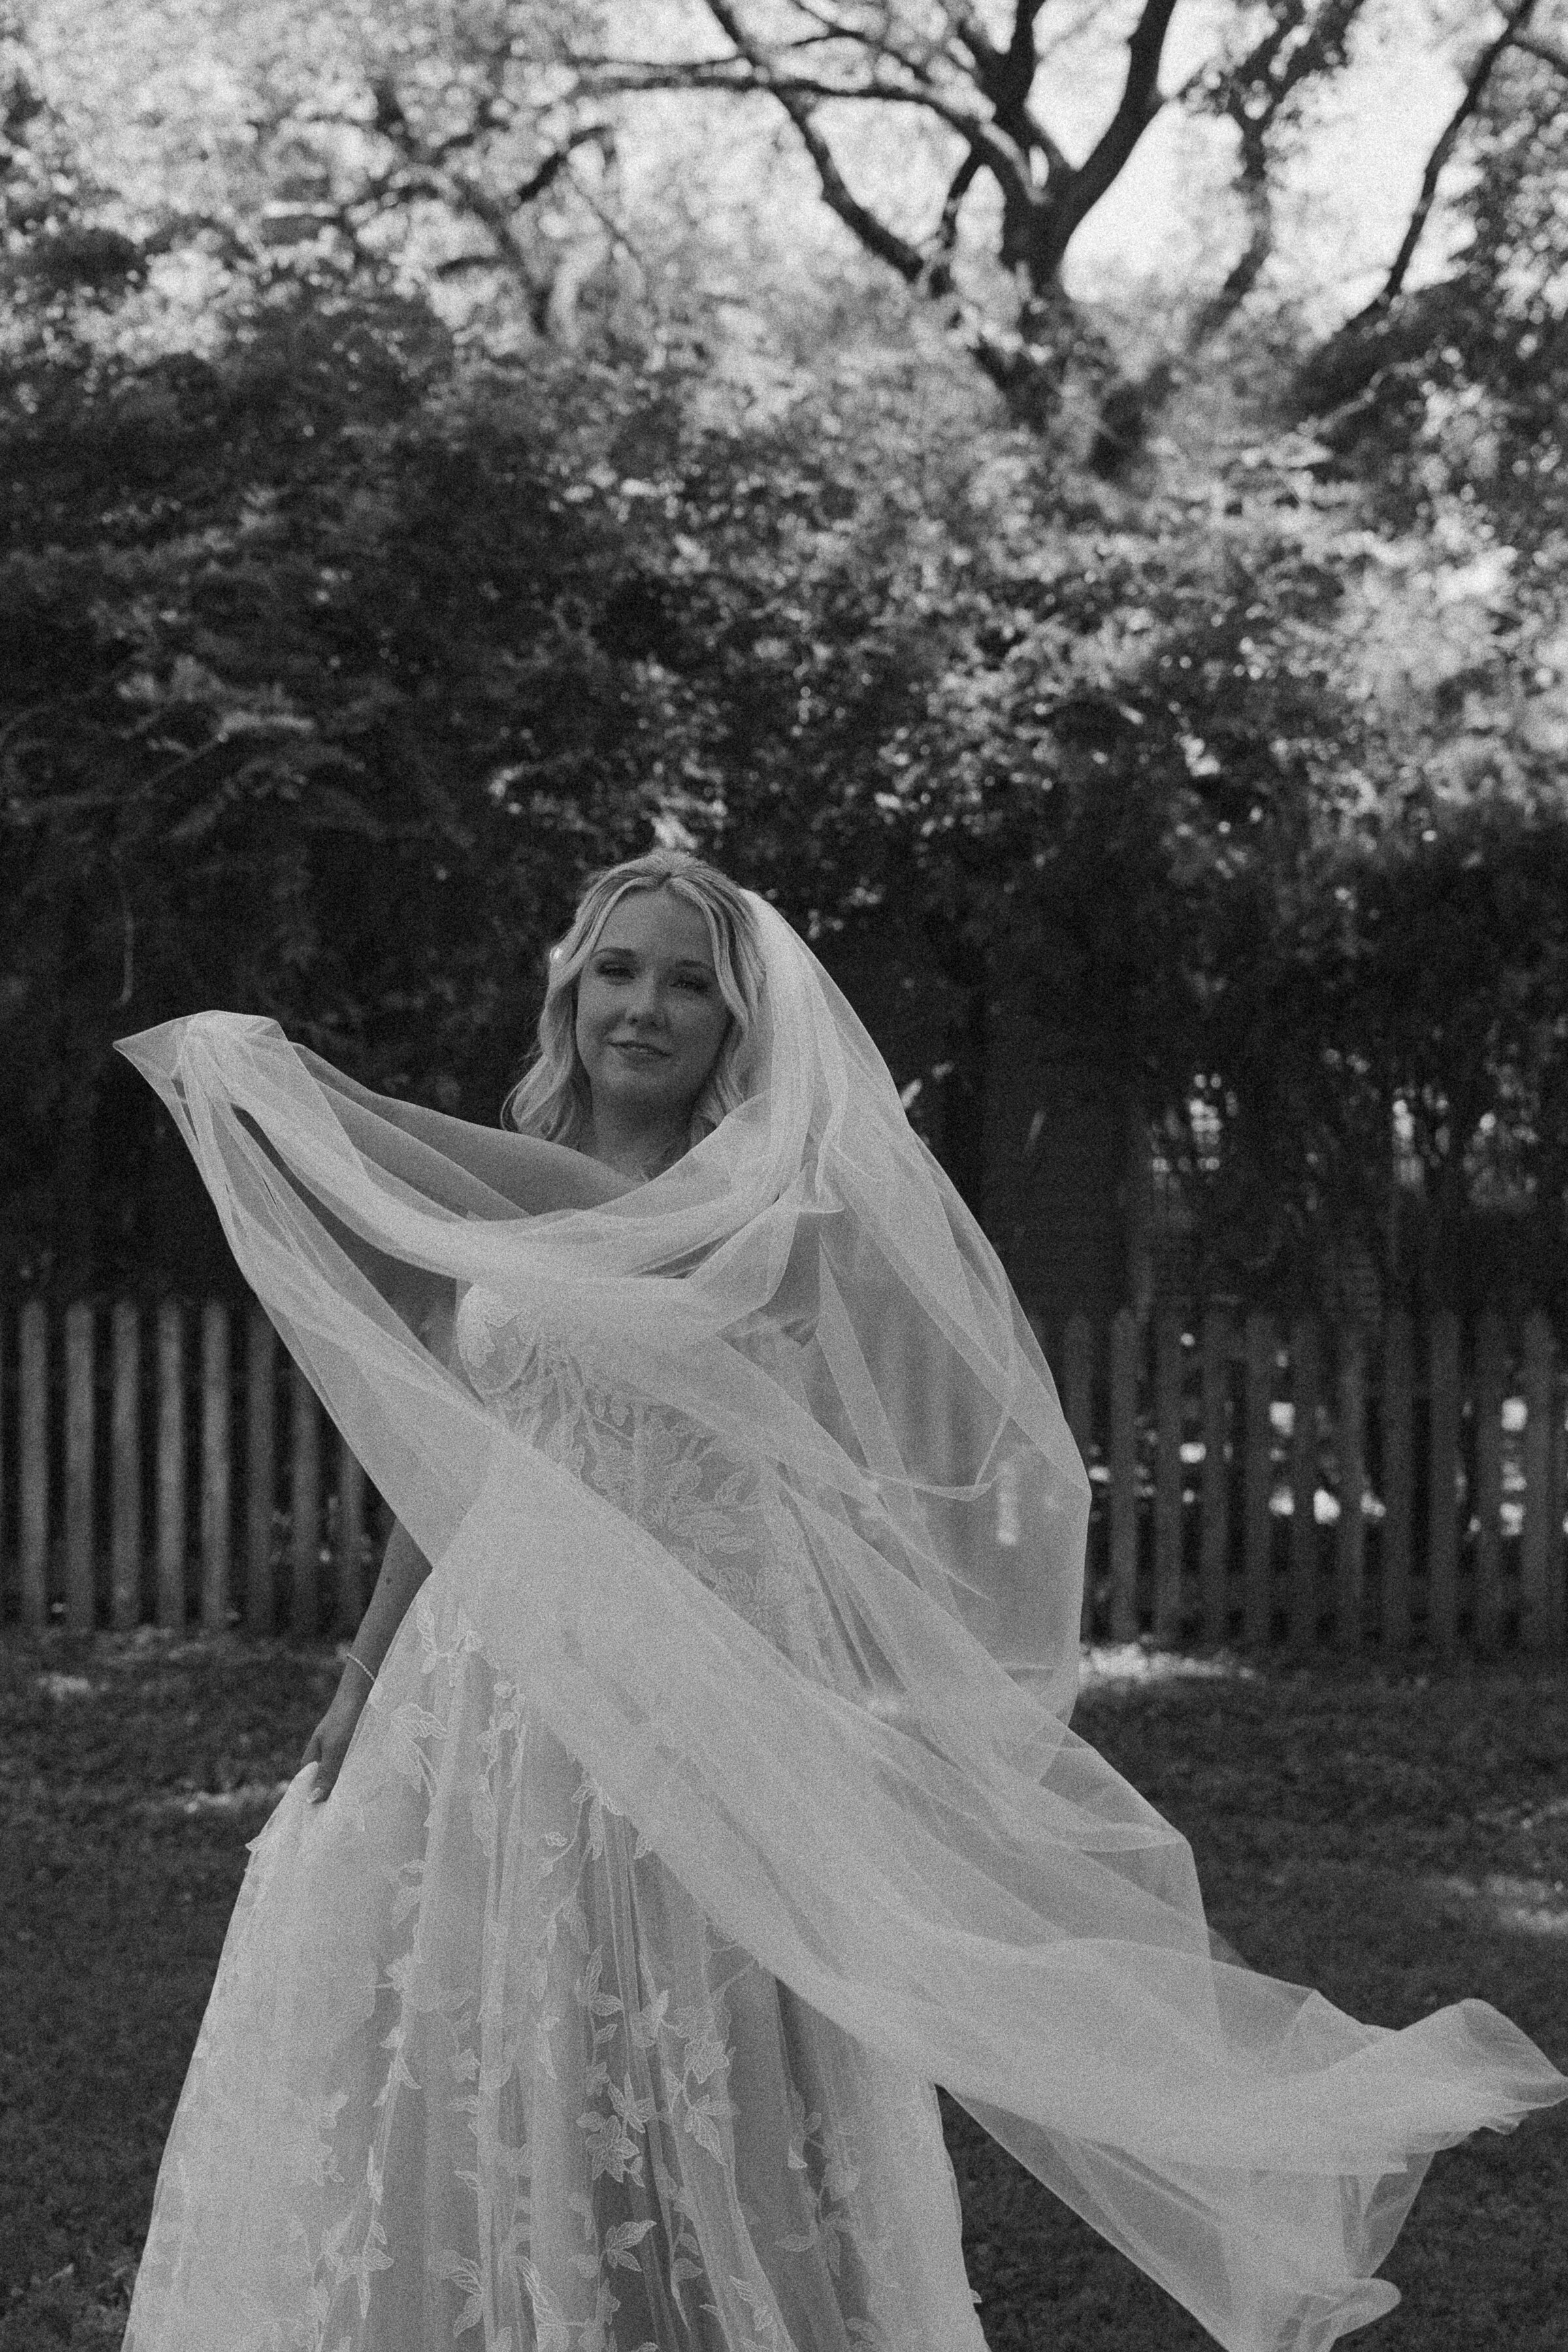 Black and white photo of a bride with veil in a garden.